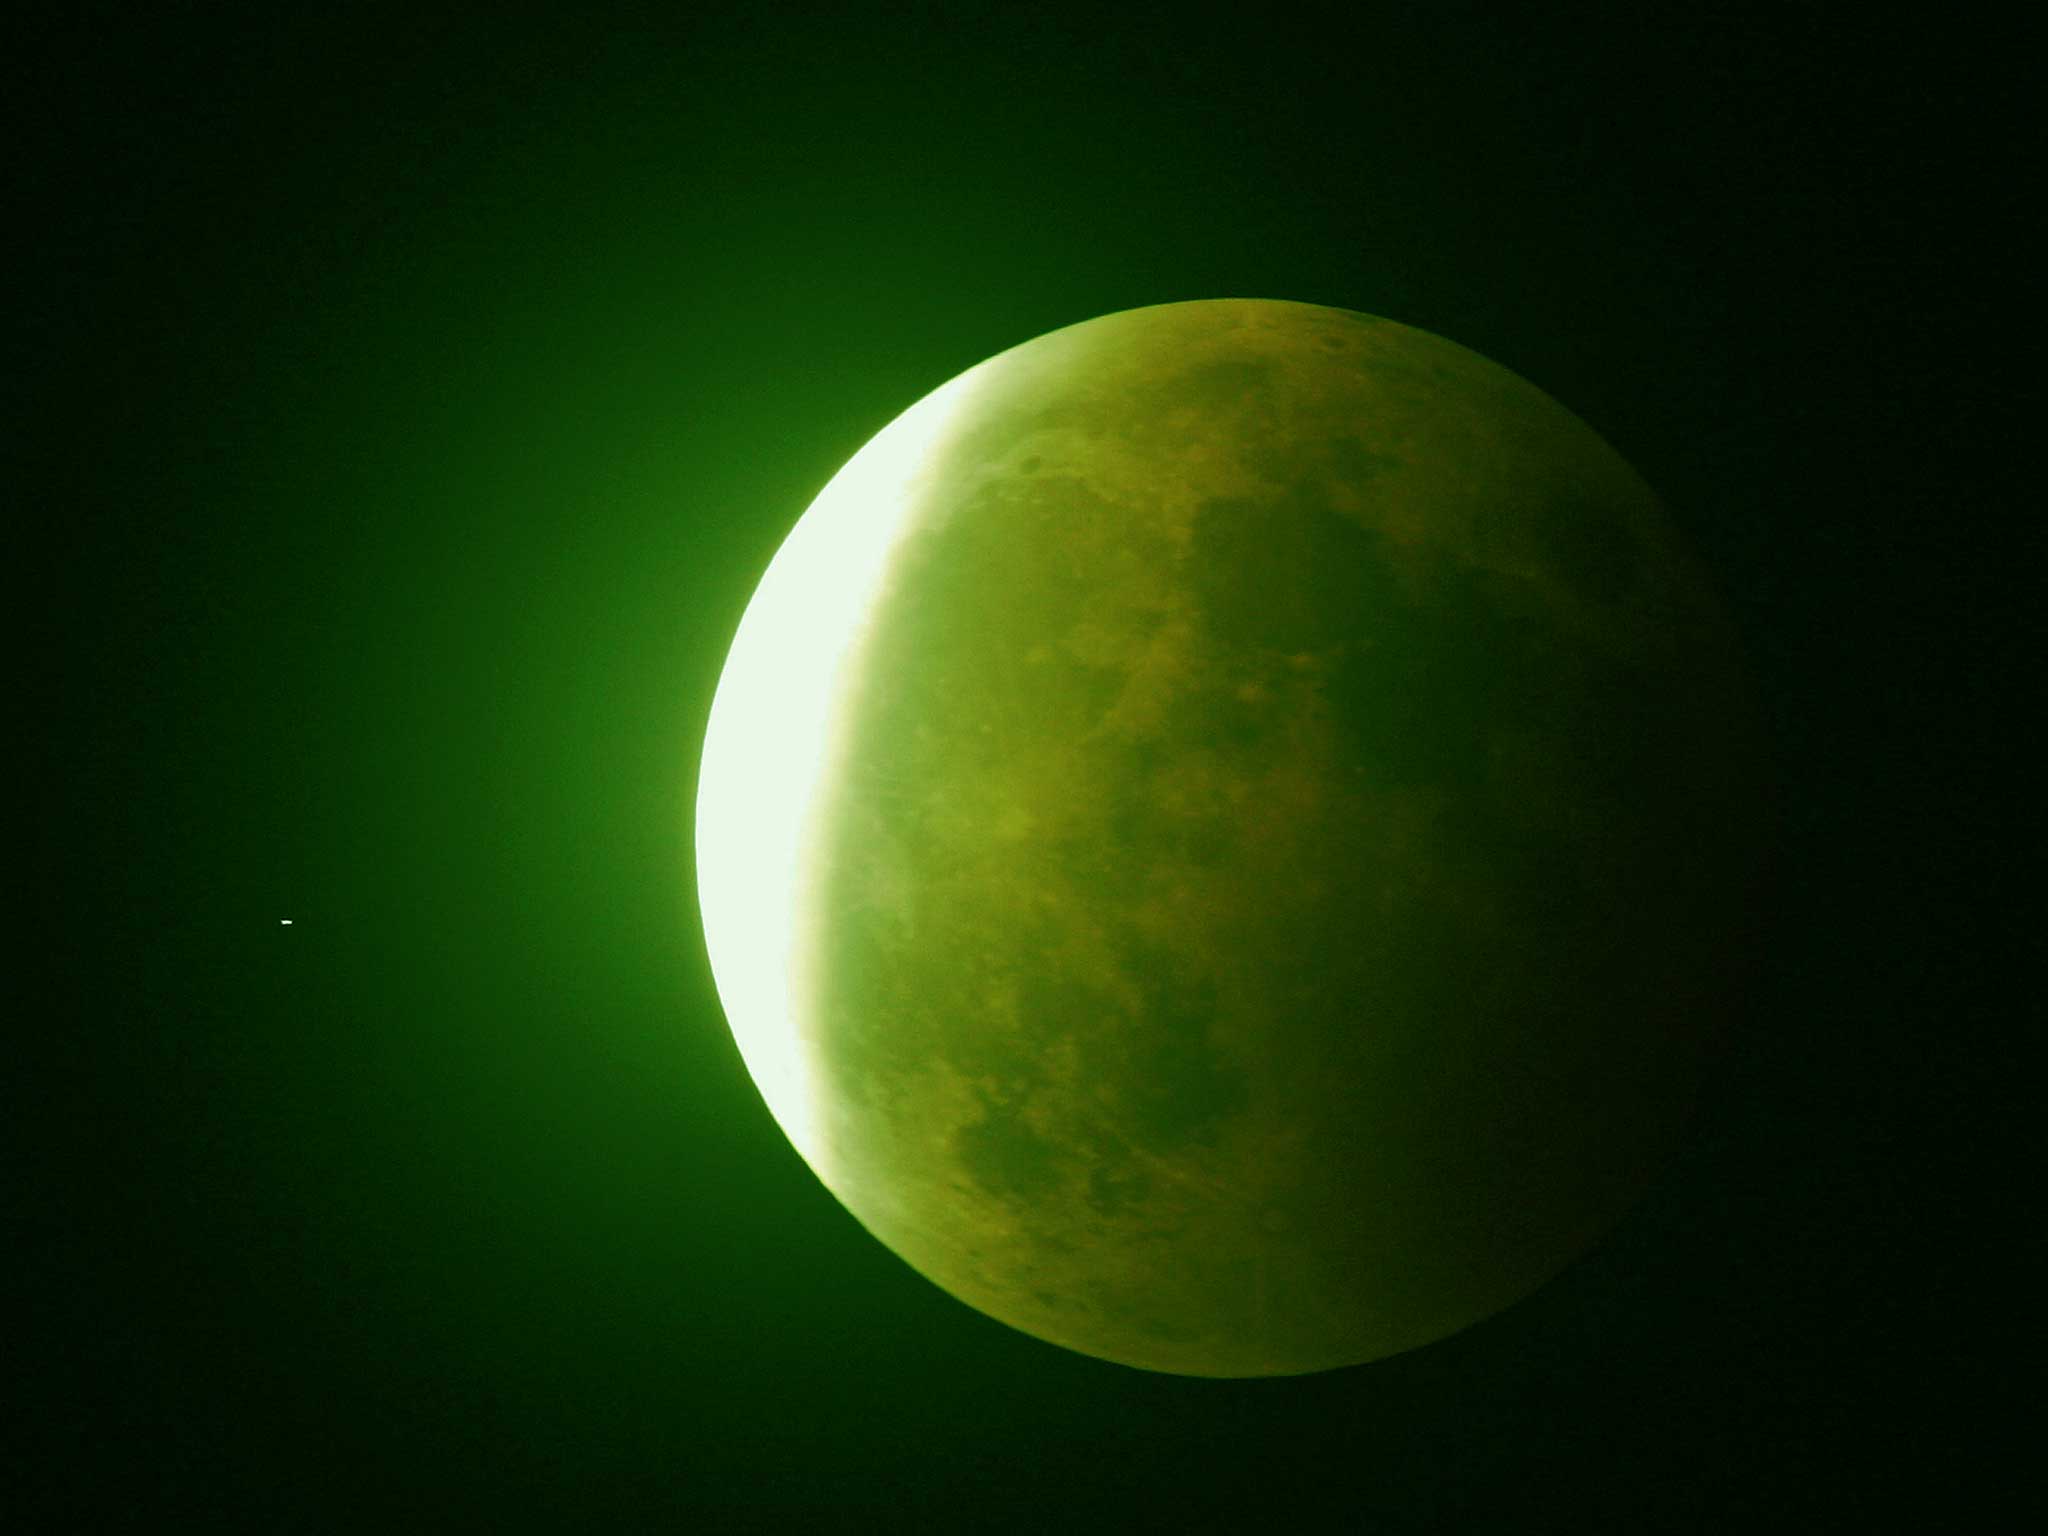 The moon is observed through a telescope by Sunni Muslims to establish the start of Ramadan